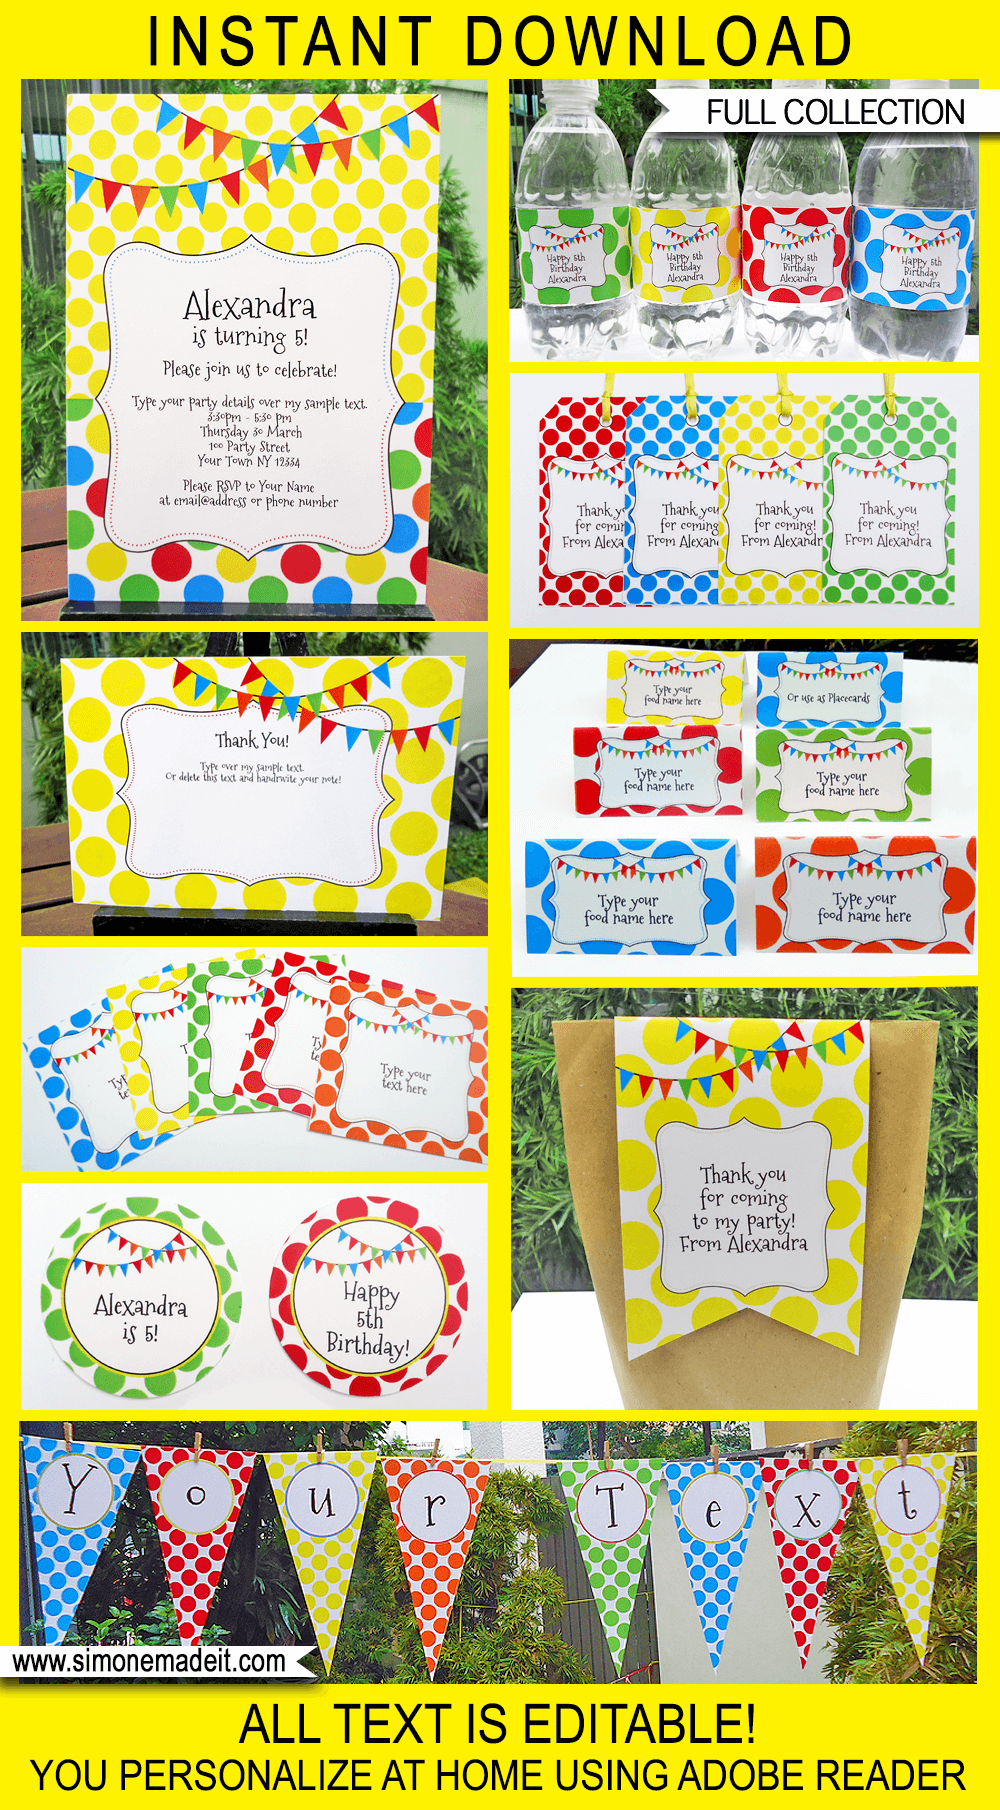 Polkadot Party Printables, Invitations & Decorations | Colorful Birthday Party | Editable Text Templates | INSTANT DOWNLOAD $12.50 via SIMONEmadeit.com